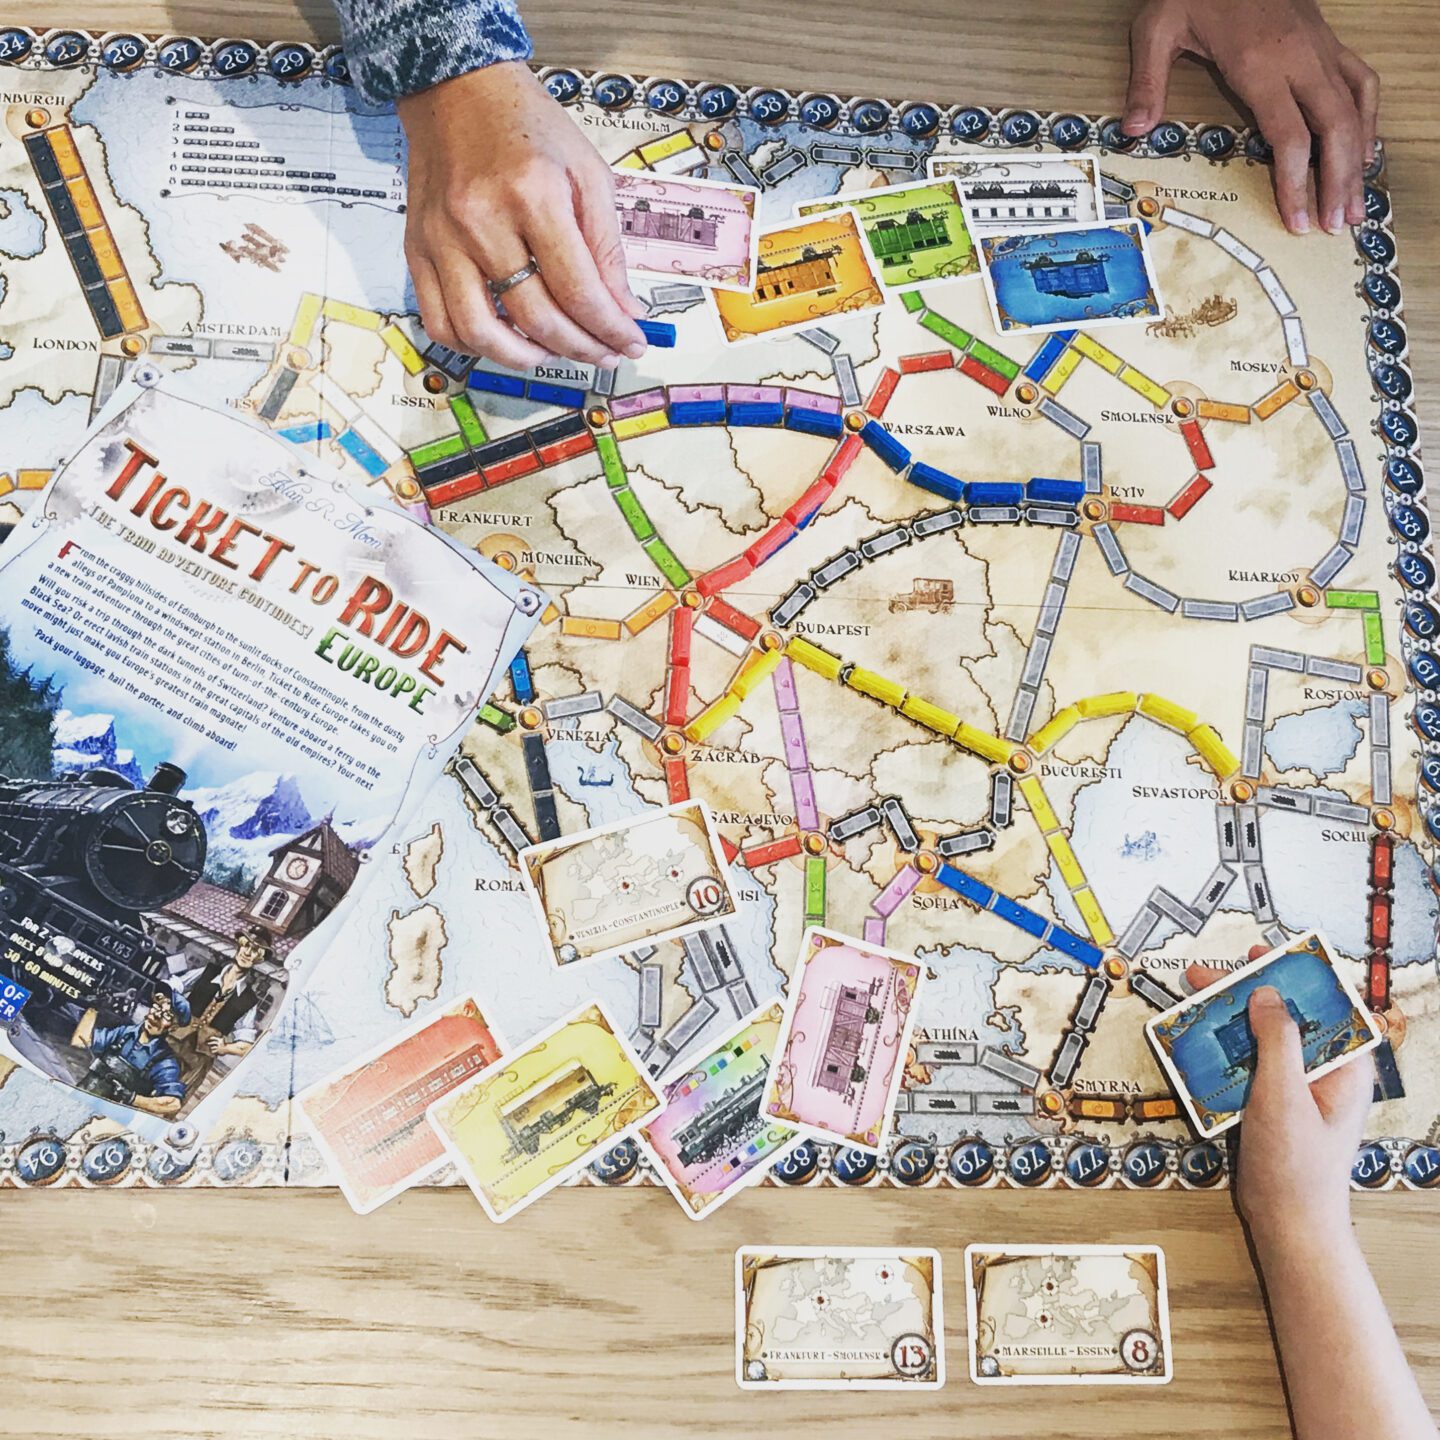 Ticket to ride board game shot from above showing two hands playing the game which is recommended as one of the best board games for tweens